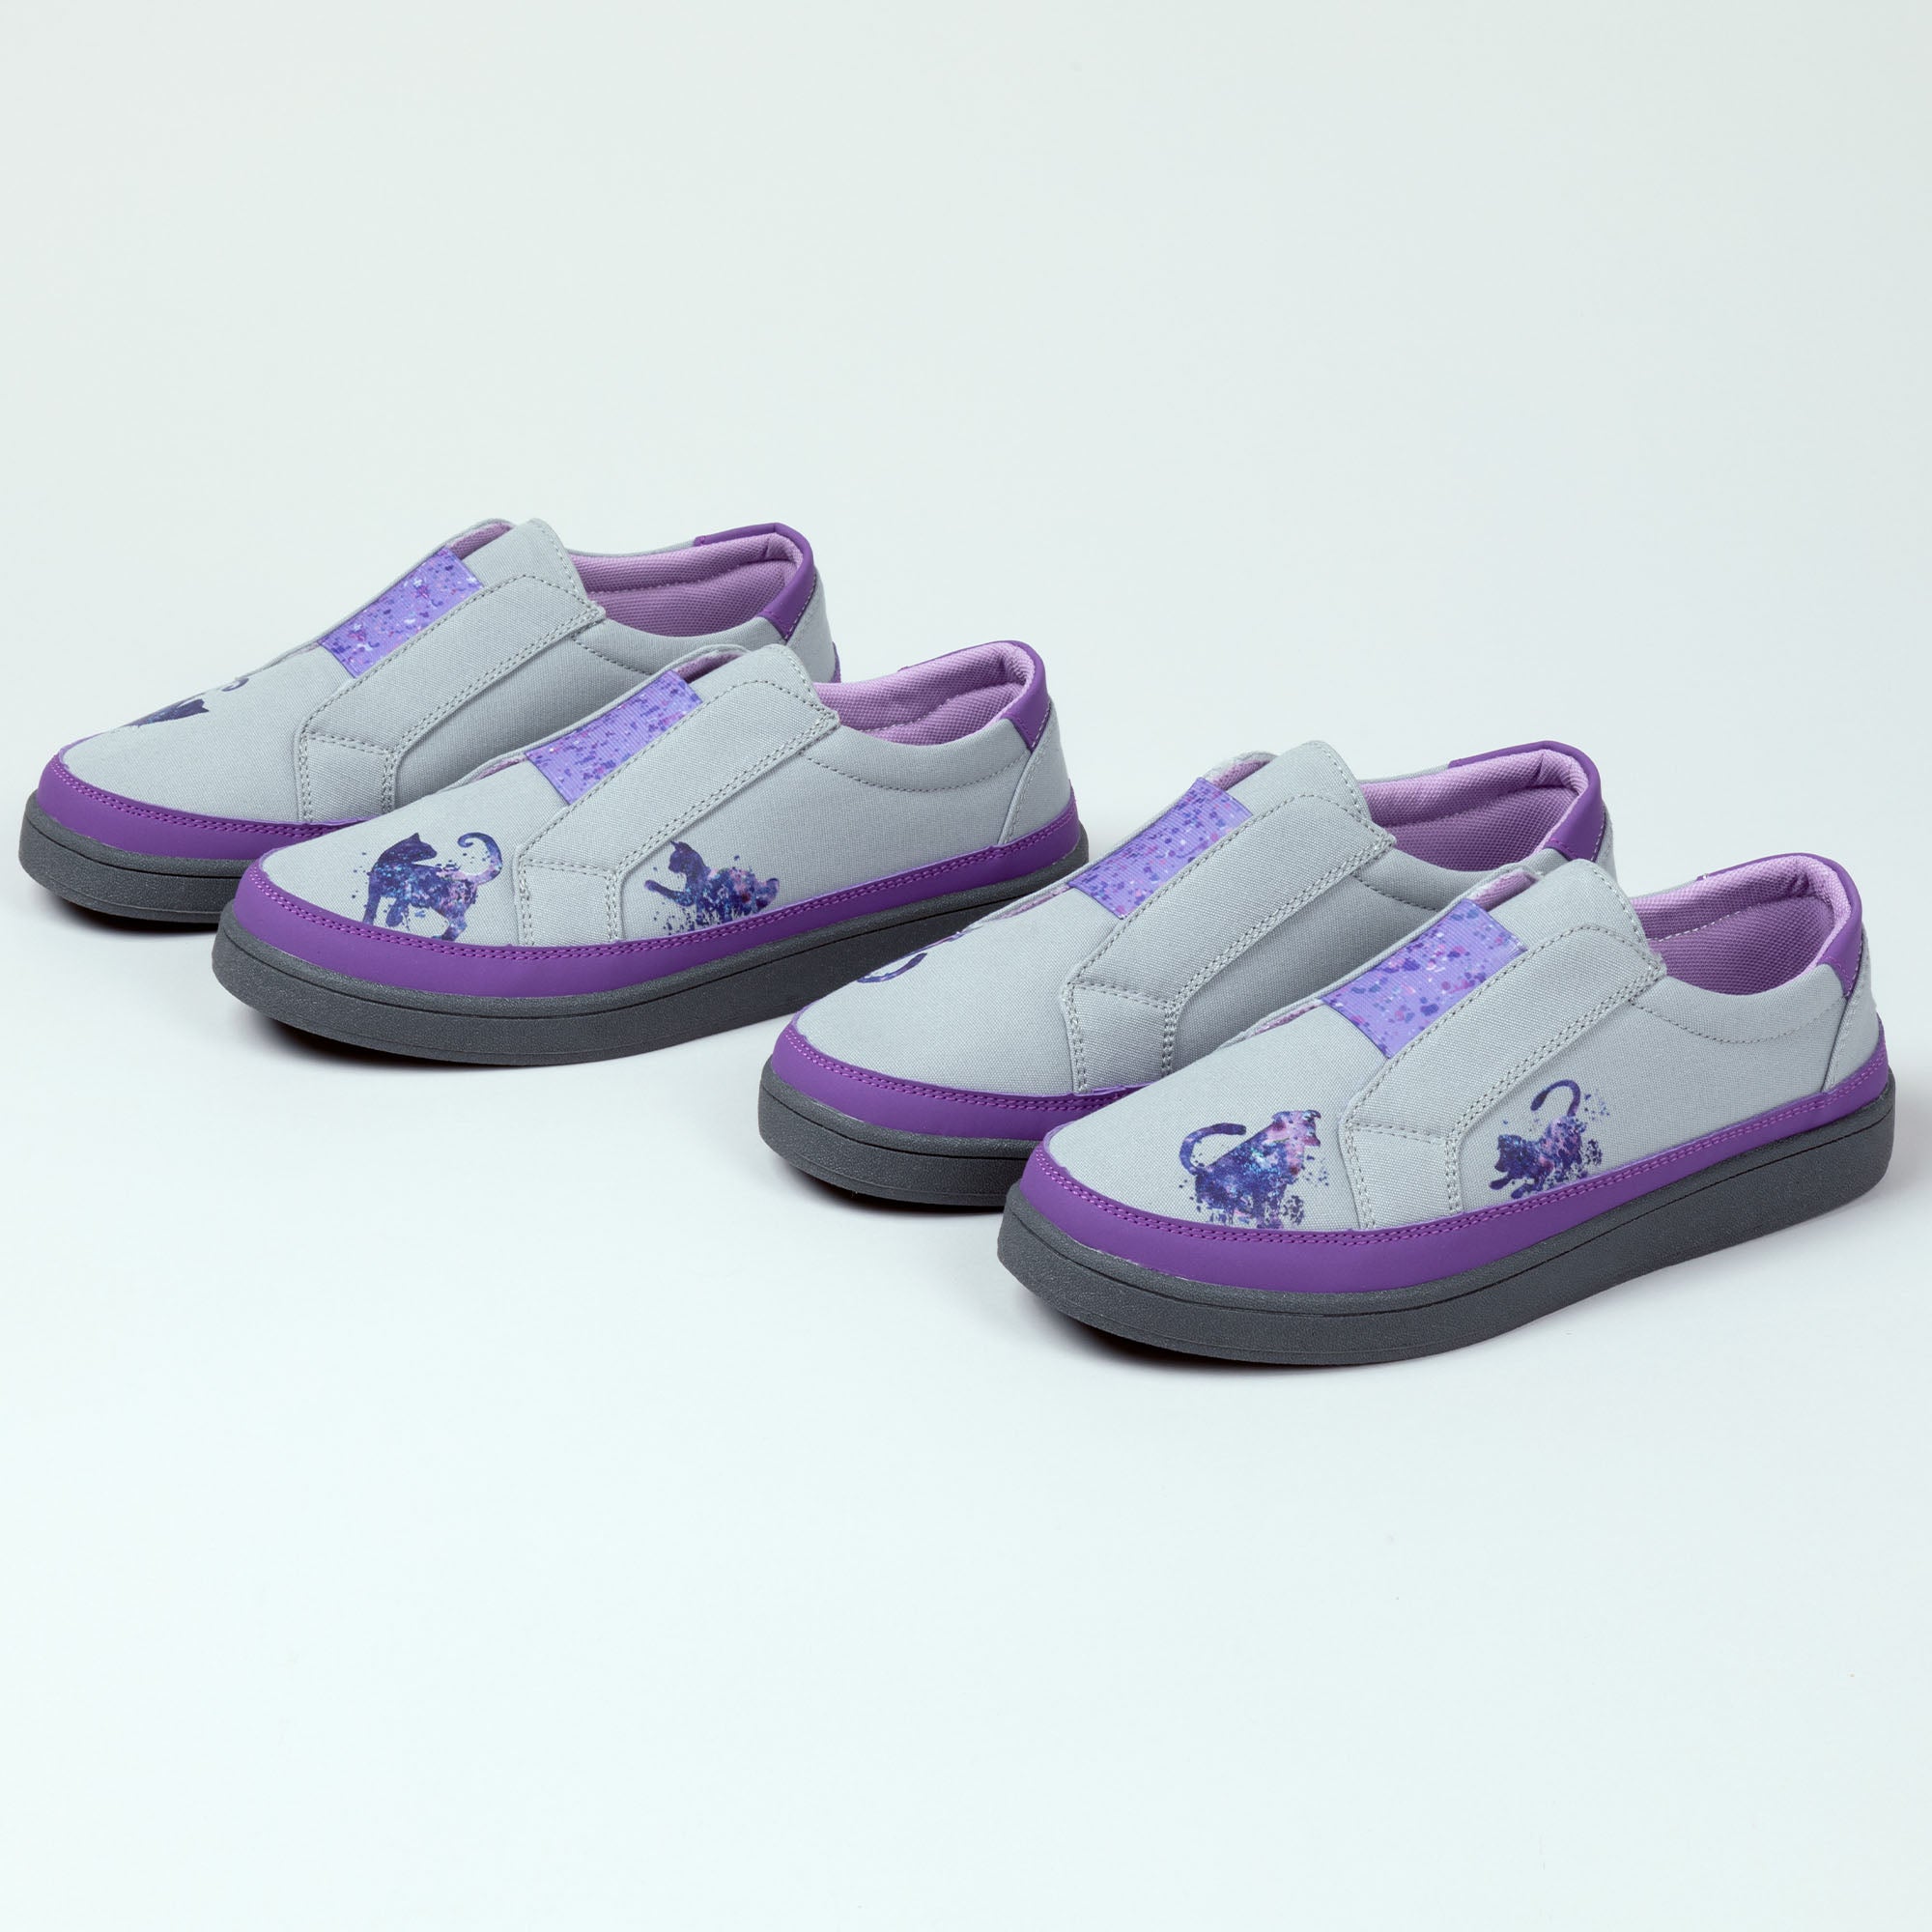 Playful Pets Slip-On Canvas Sneakers - Dog - 7